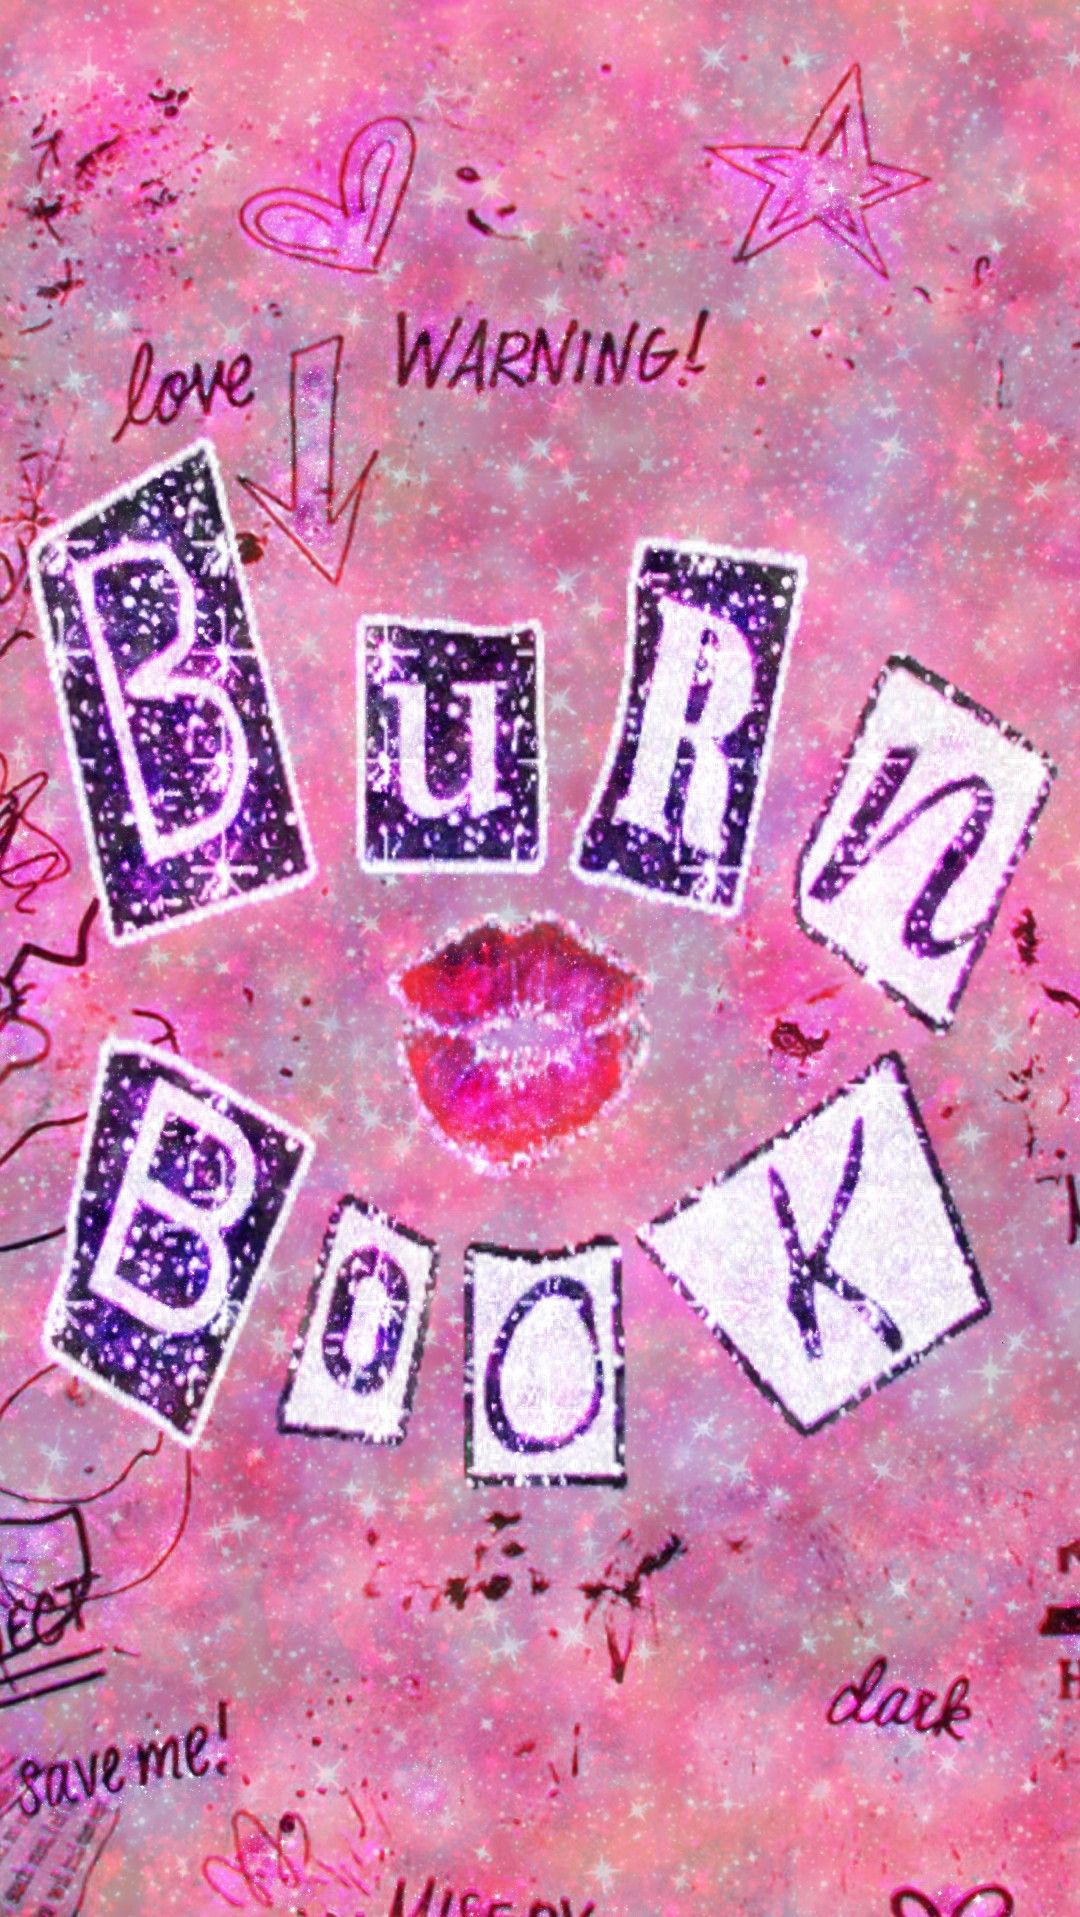 Burn Book Galaxy, made by me #pink #galaxy #wallpaper #background #glitter #sp. Pink tumblr aesthetic, iPhone wallpaper girly, iPhone wallpaper tumblr aesthetic